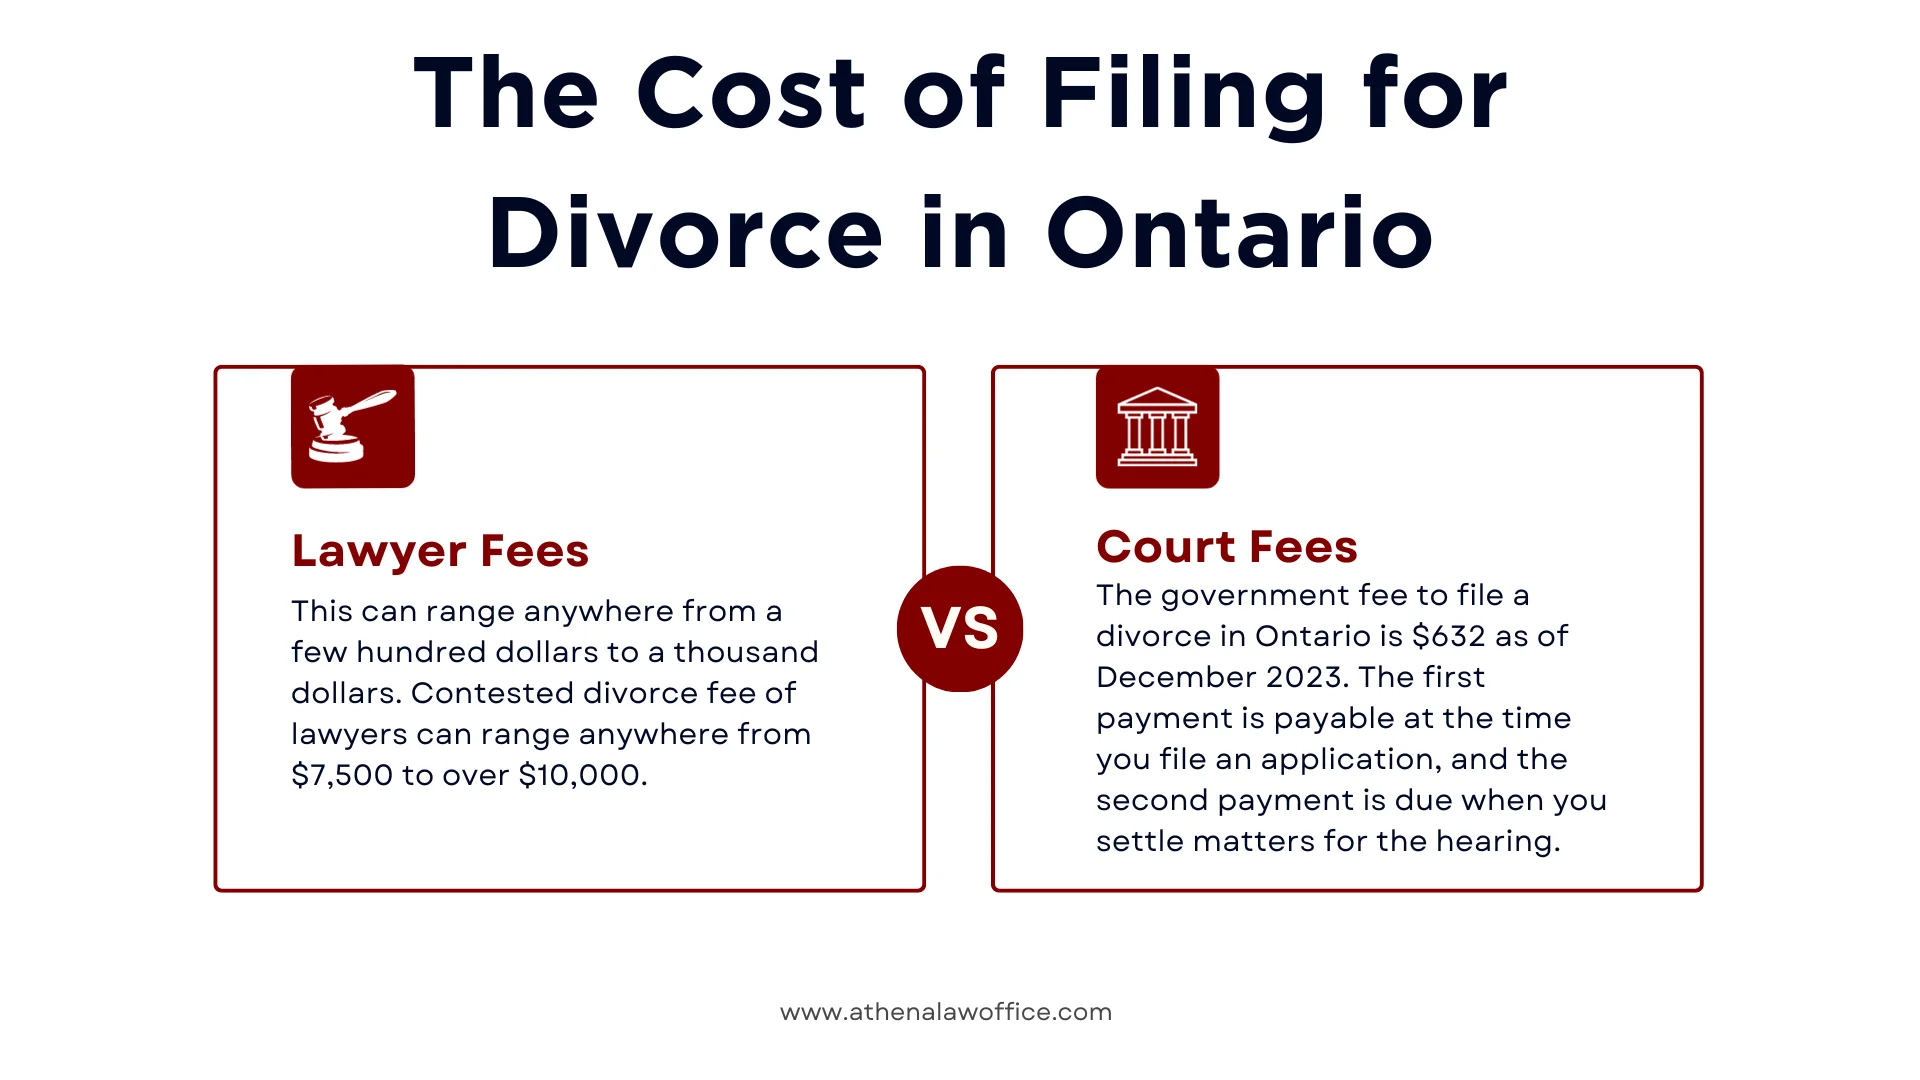 An infographic explaining the cost of filing for divorce in Canada